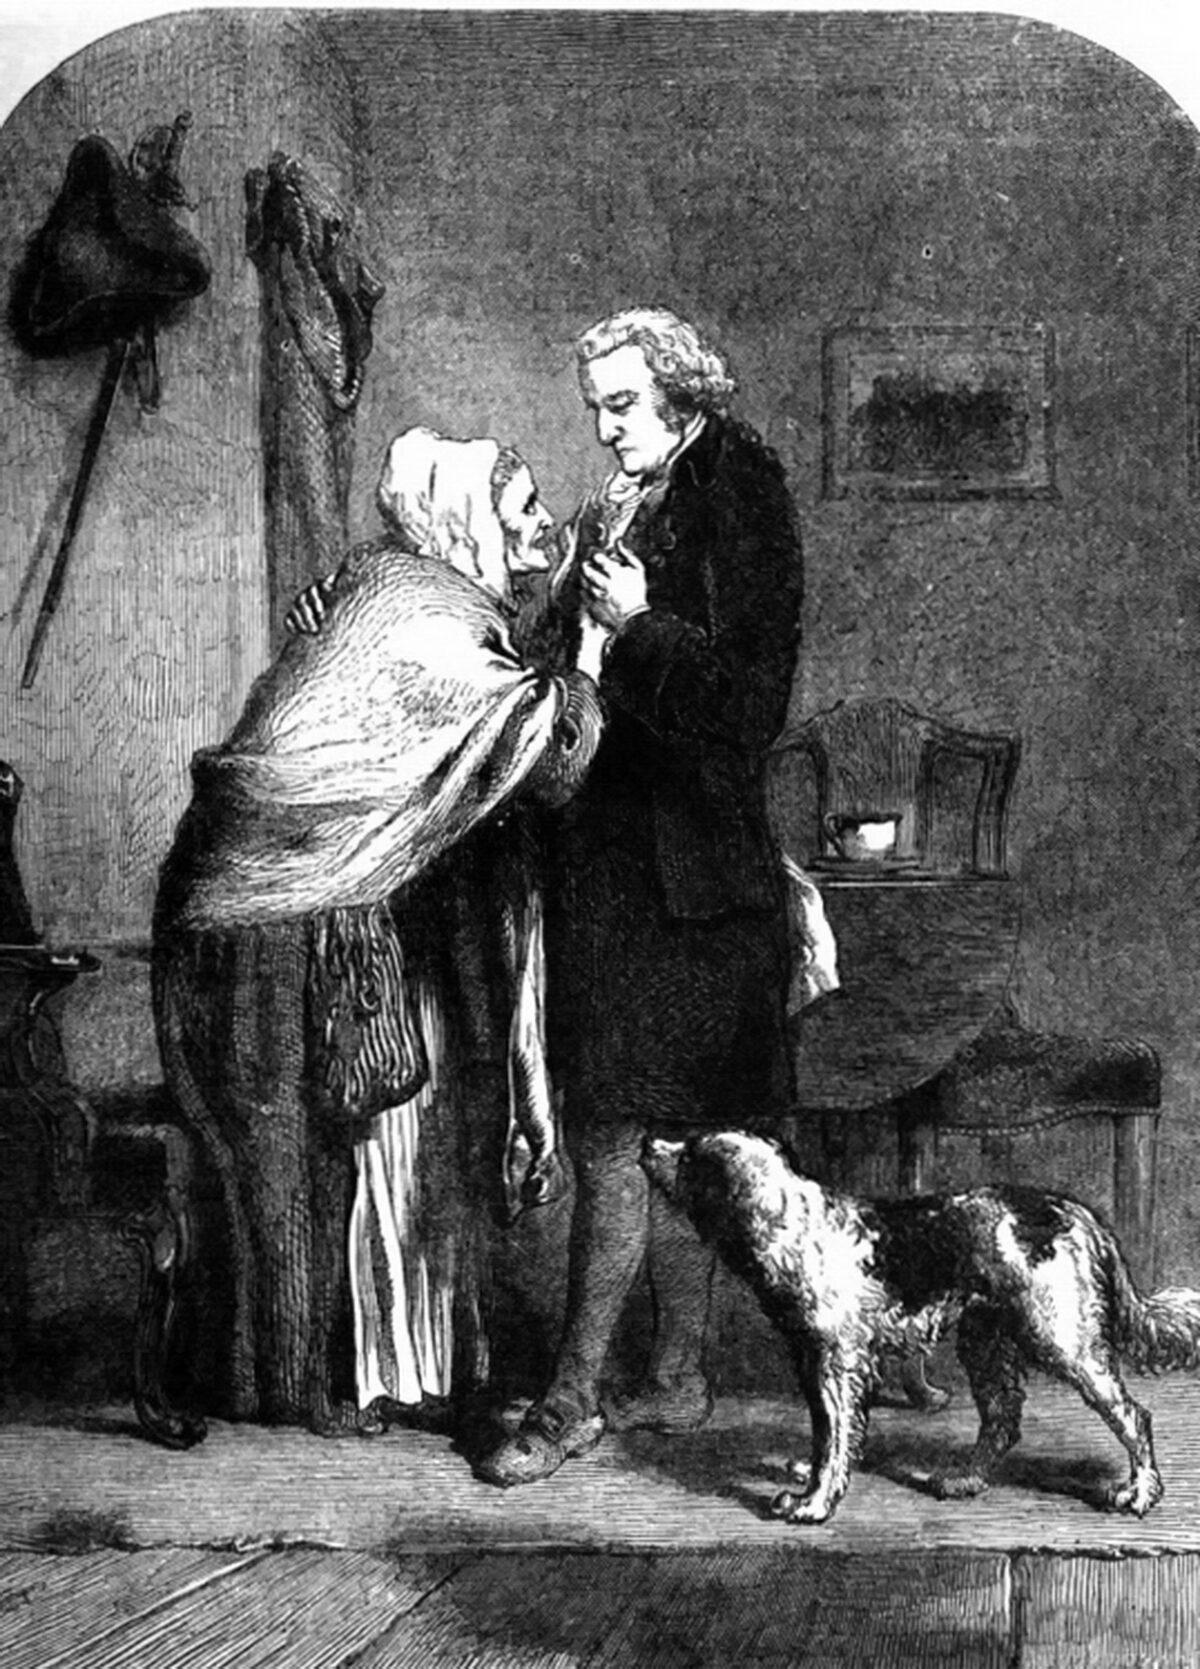 “George Washington and His Mother,” from John Cassell's “Illustrated History of England, Volume 5." (Public Domain)